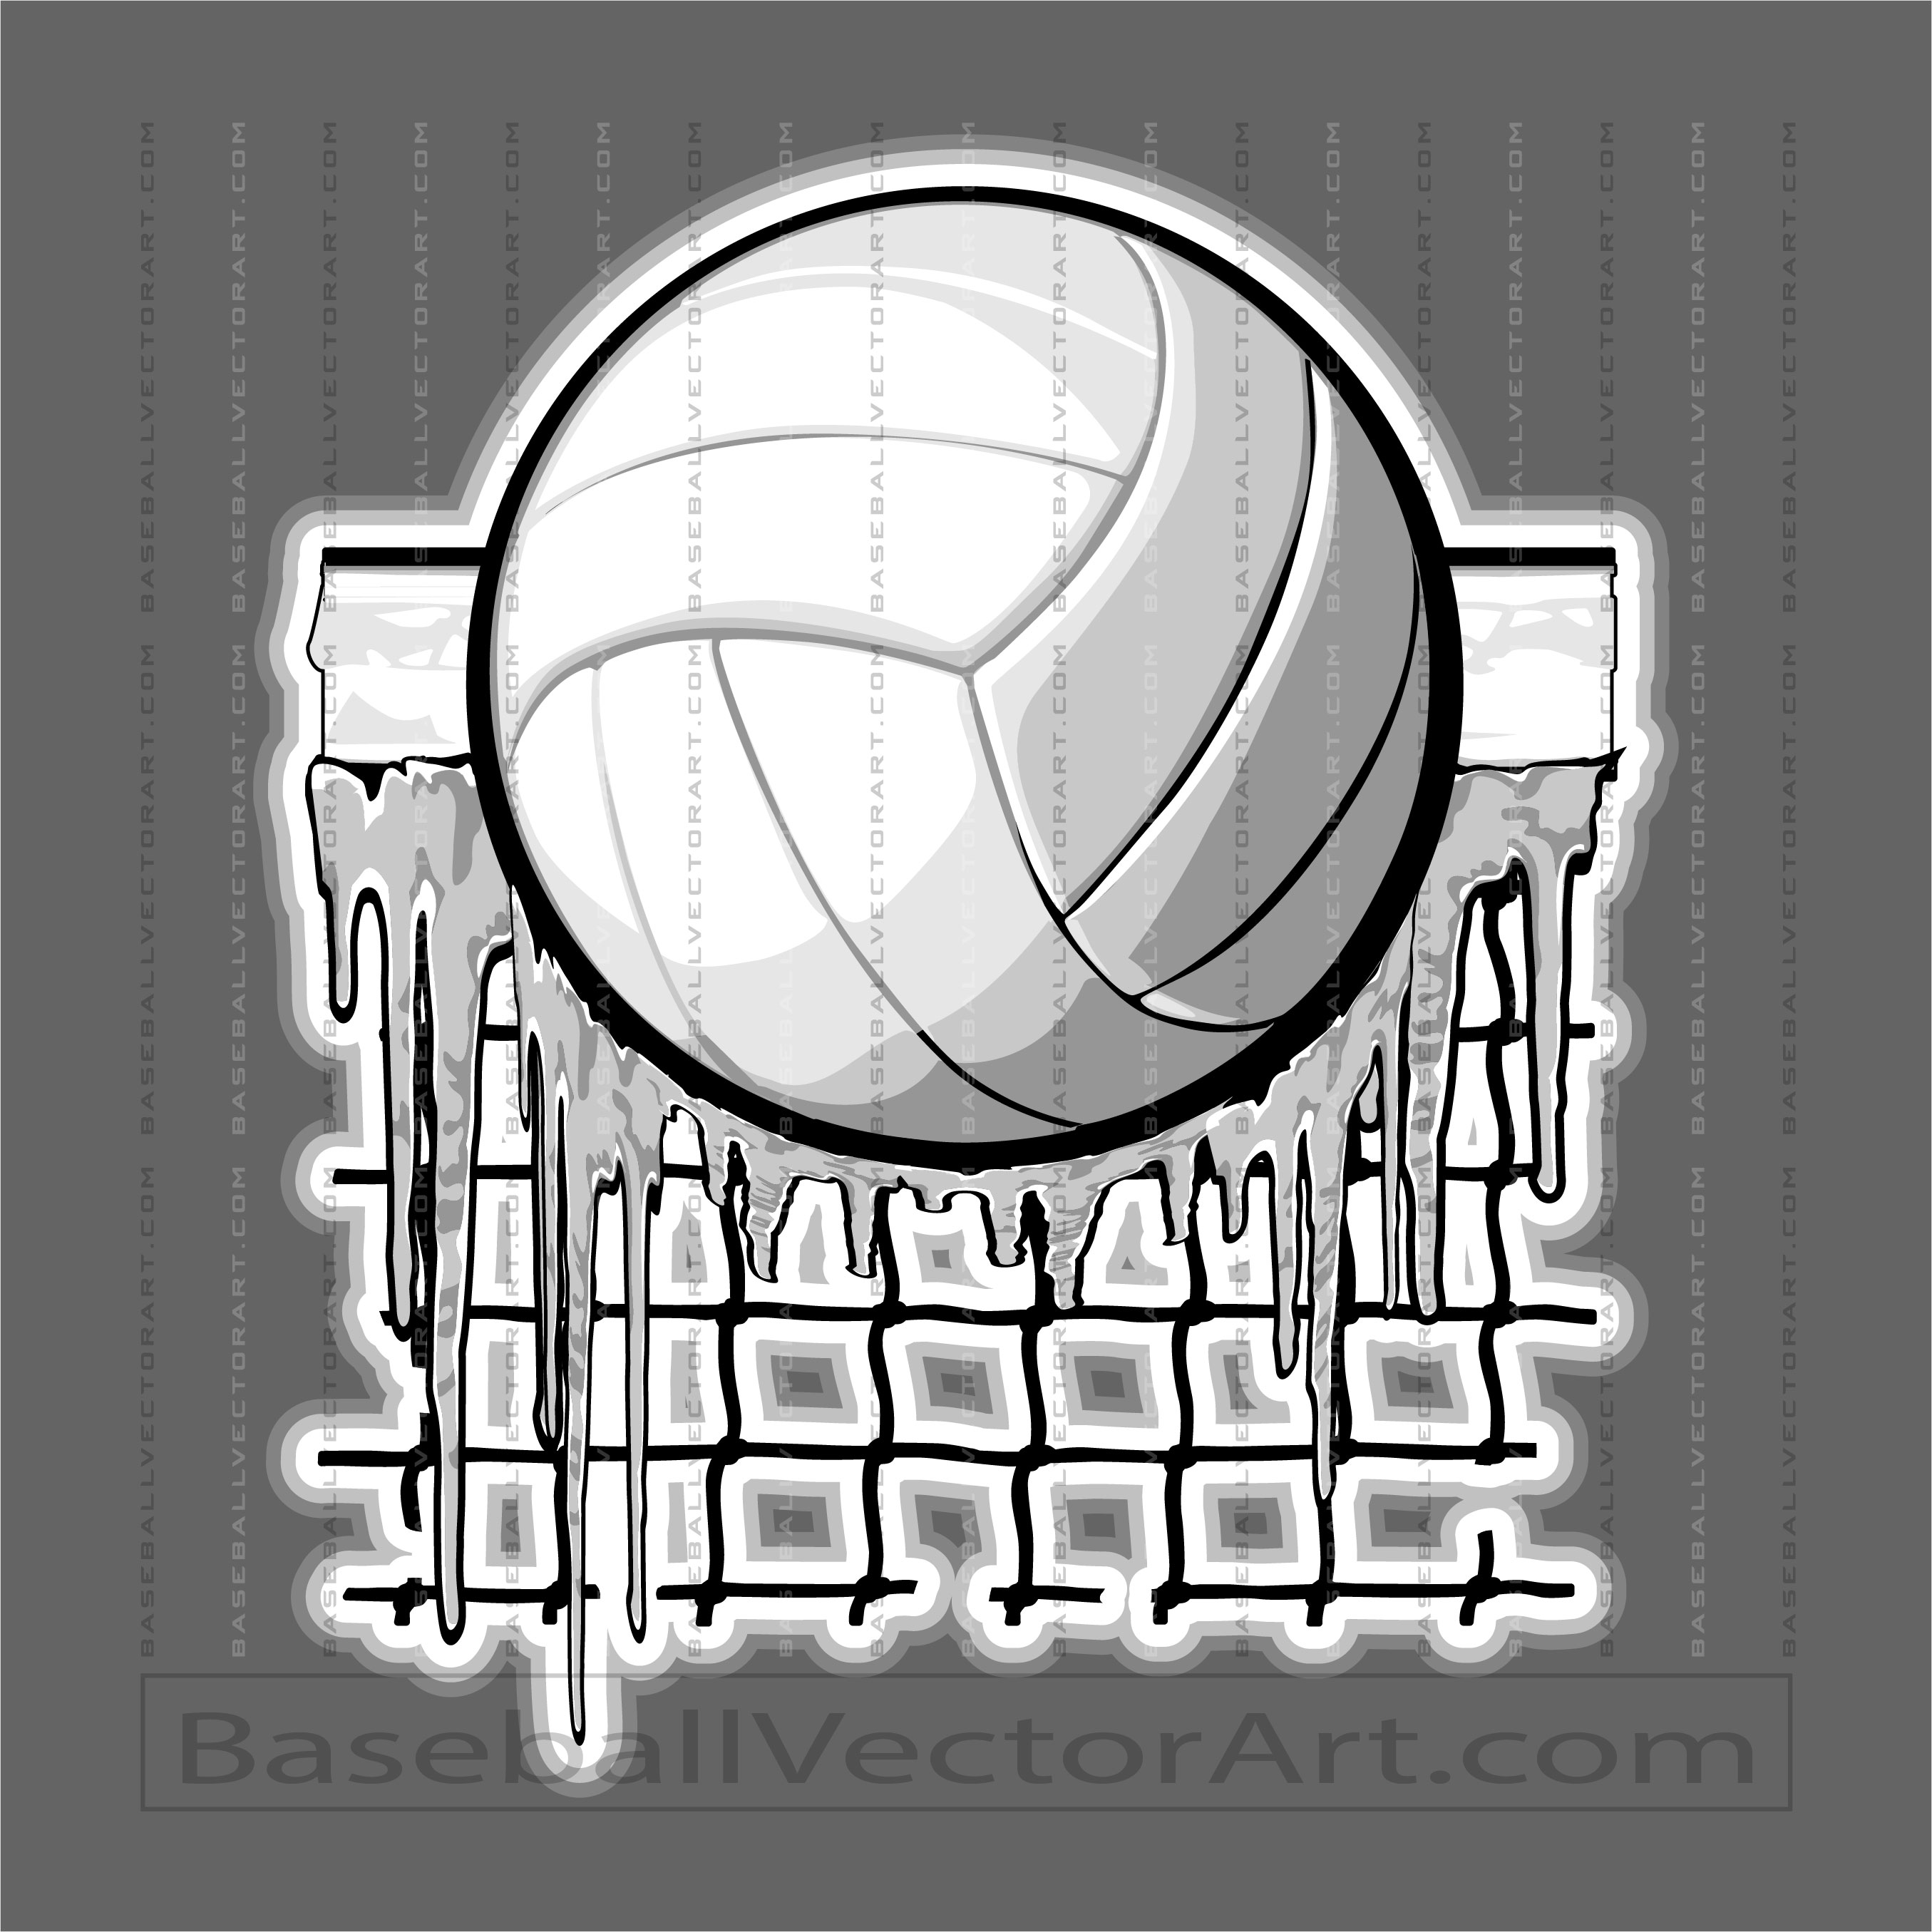 Cold Weather Volleyball Image